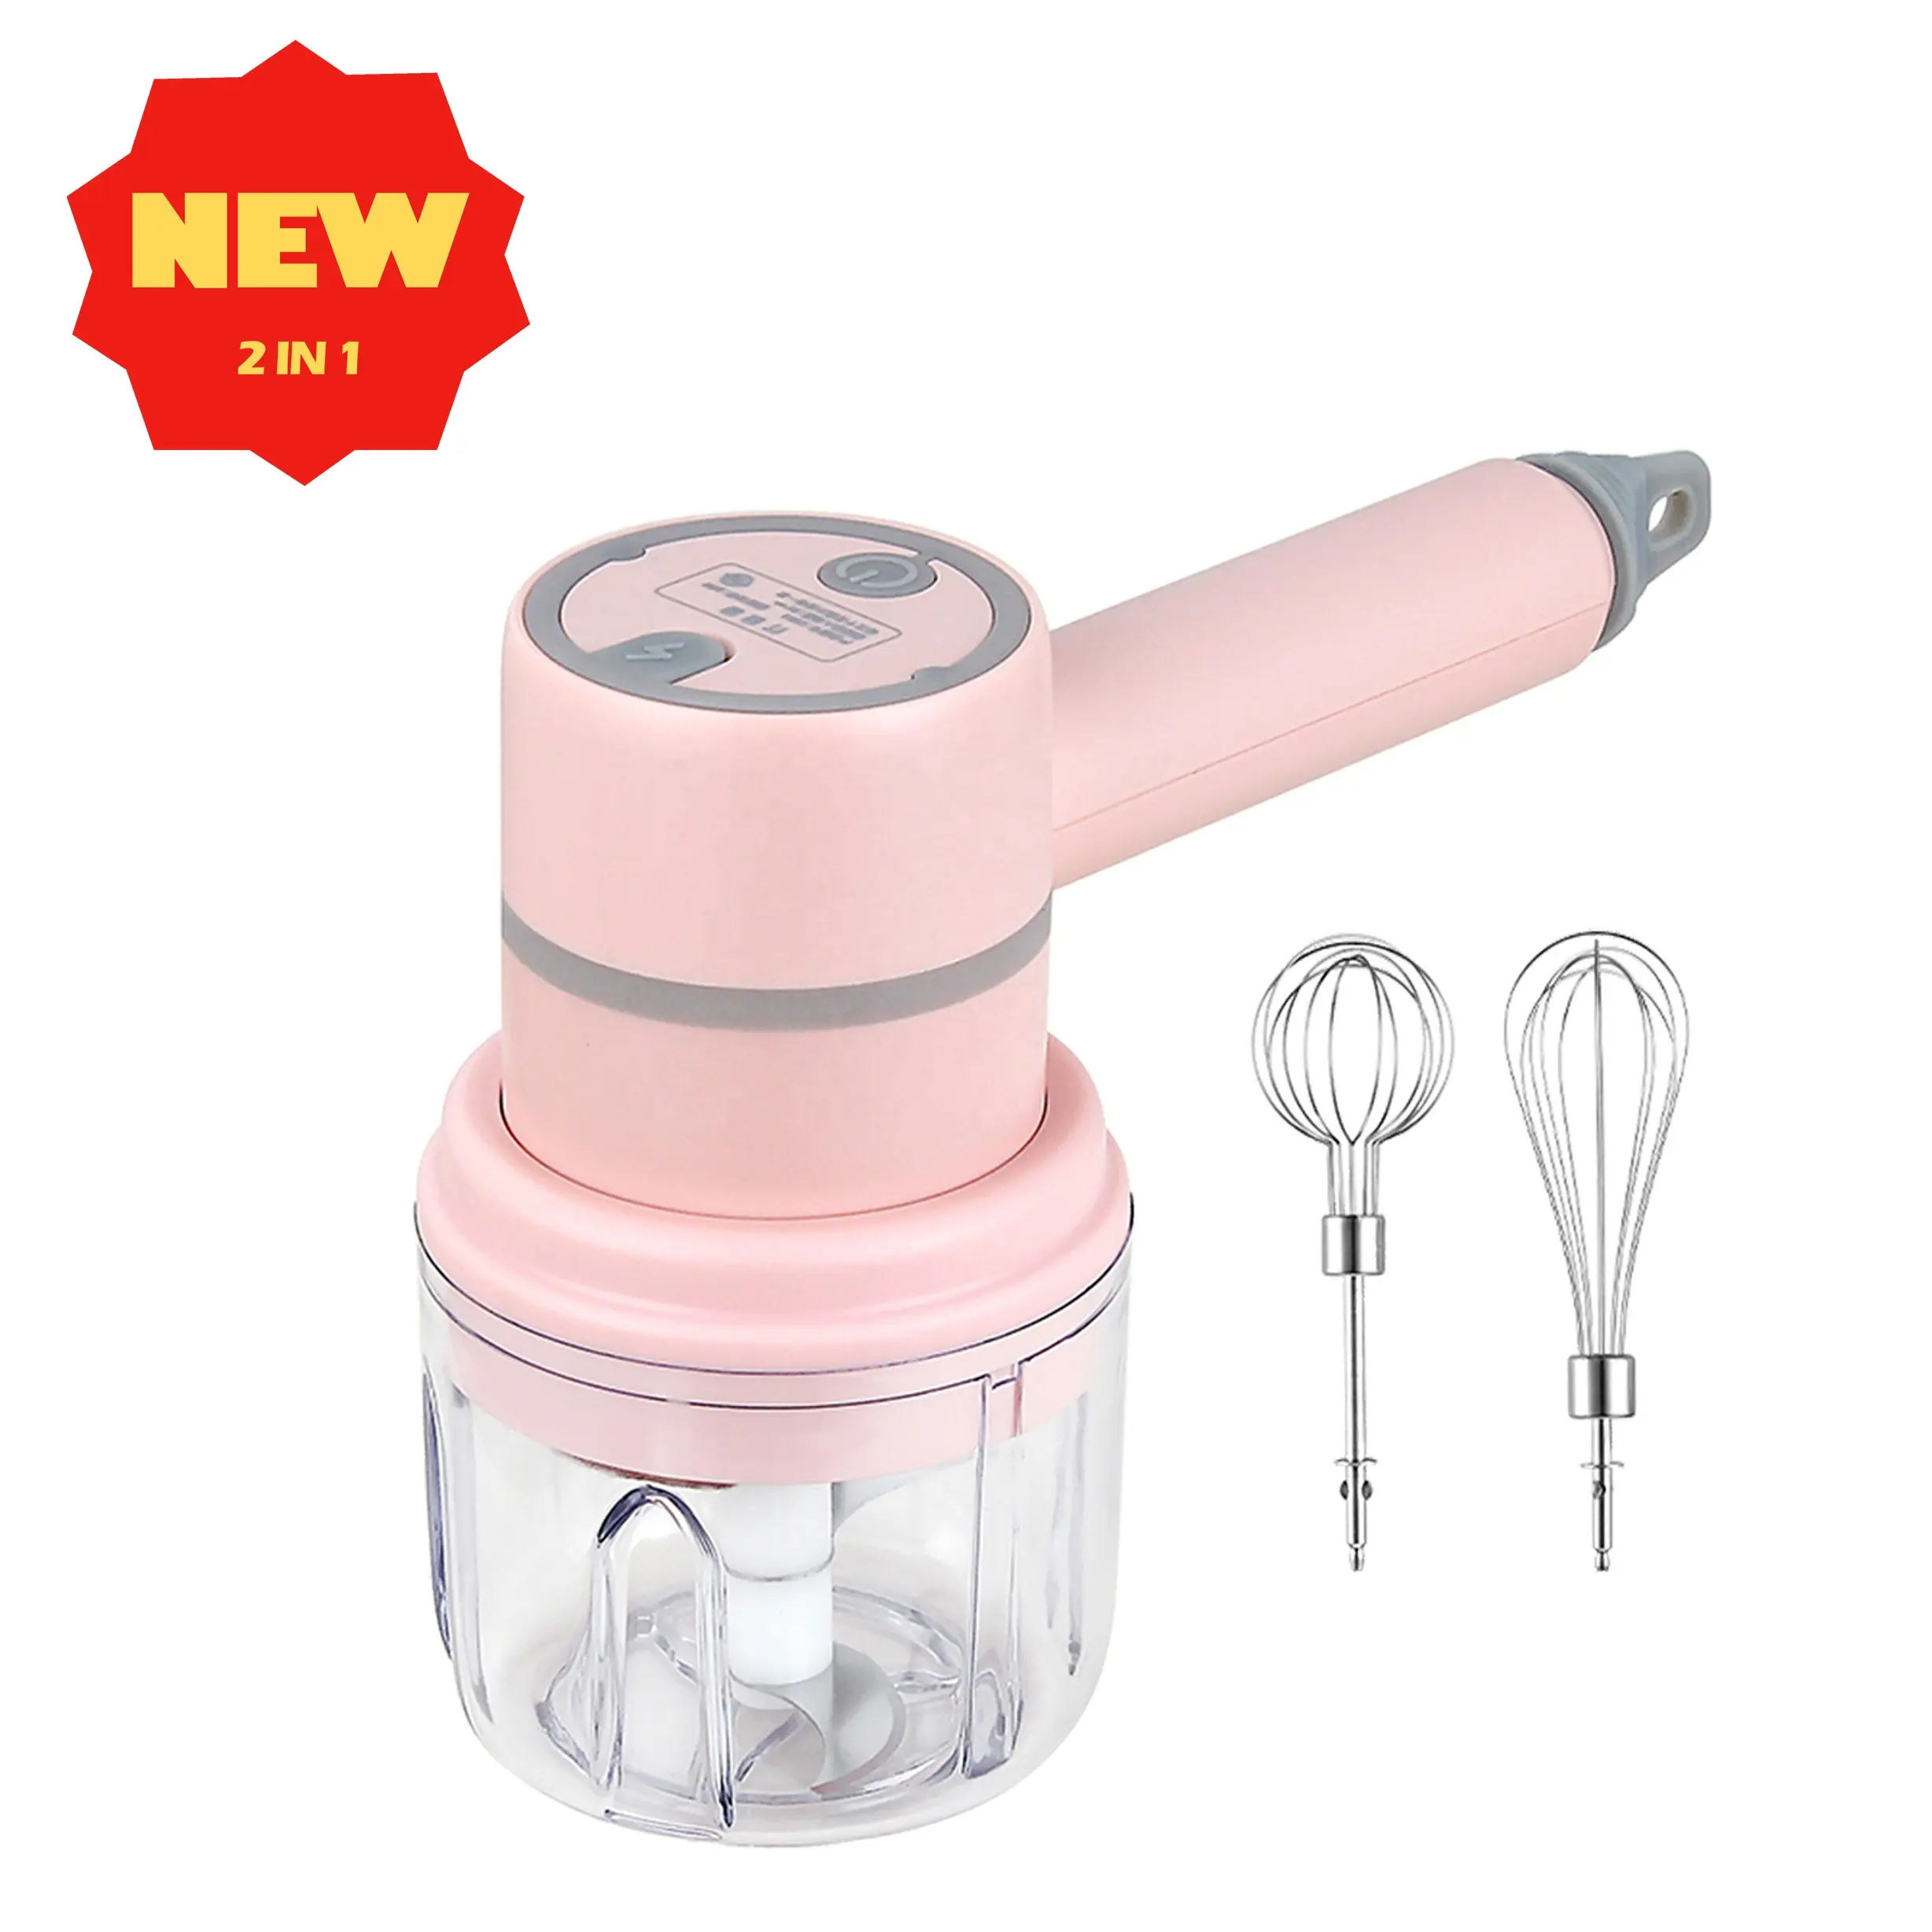 Electric 3-speed speed regulation two-in-one wireless portable manual outdoor household egg beater food mixer Blender